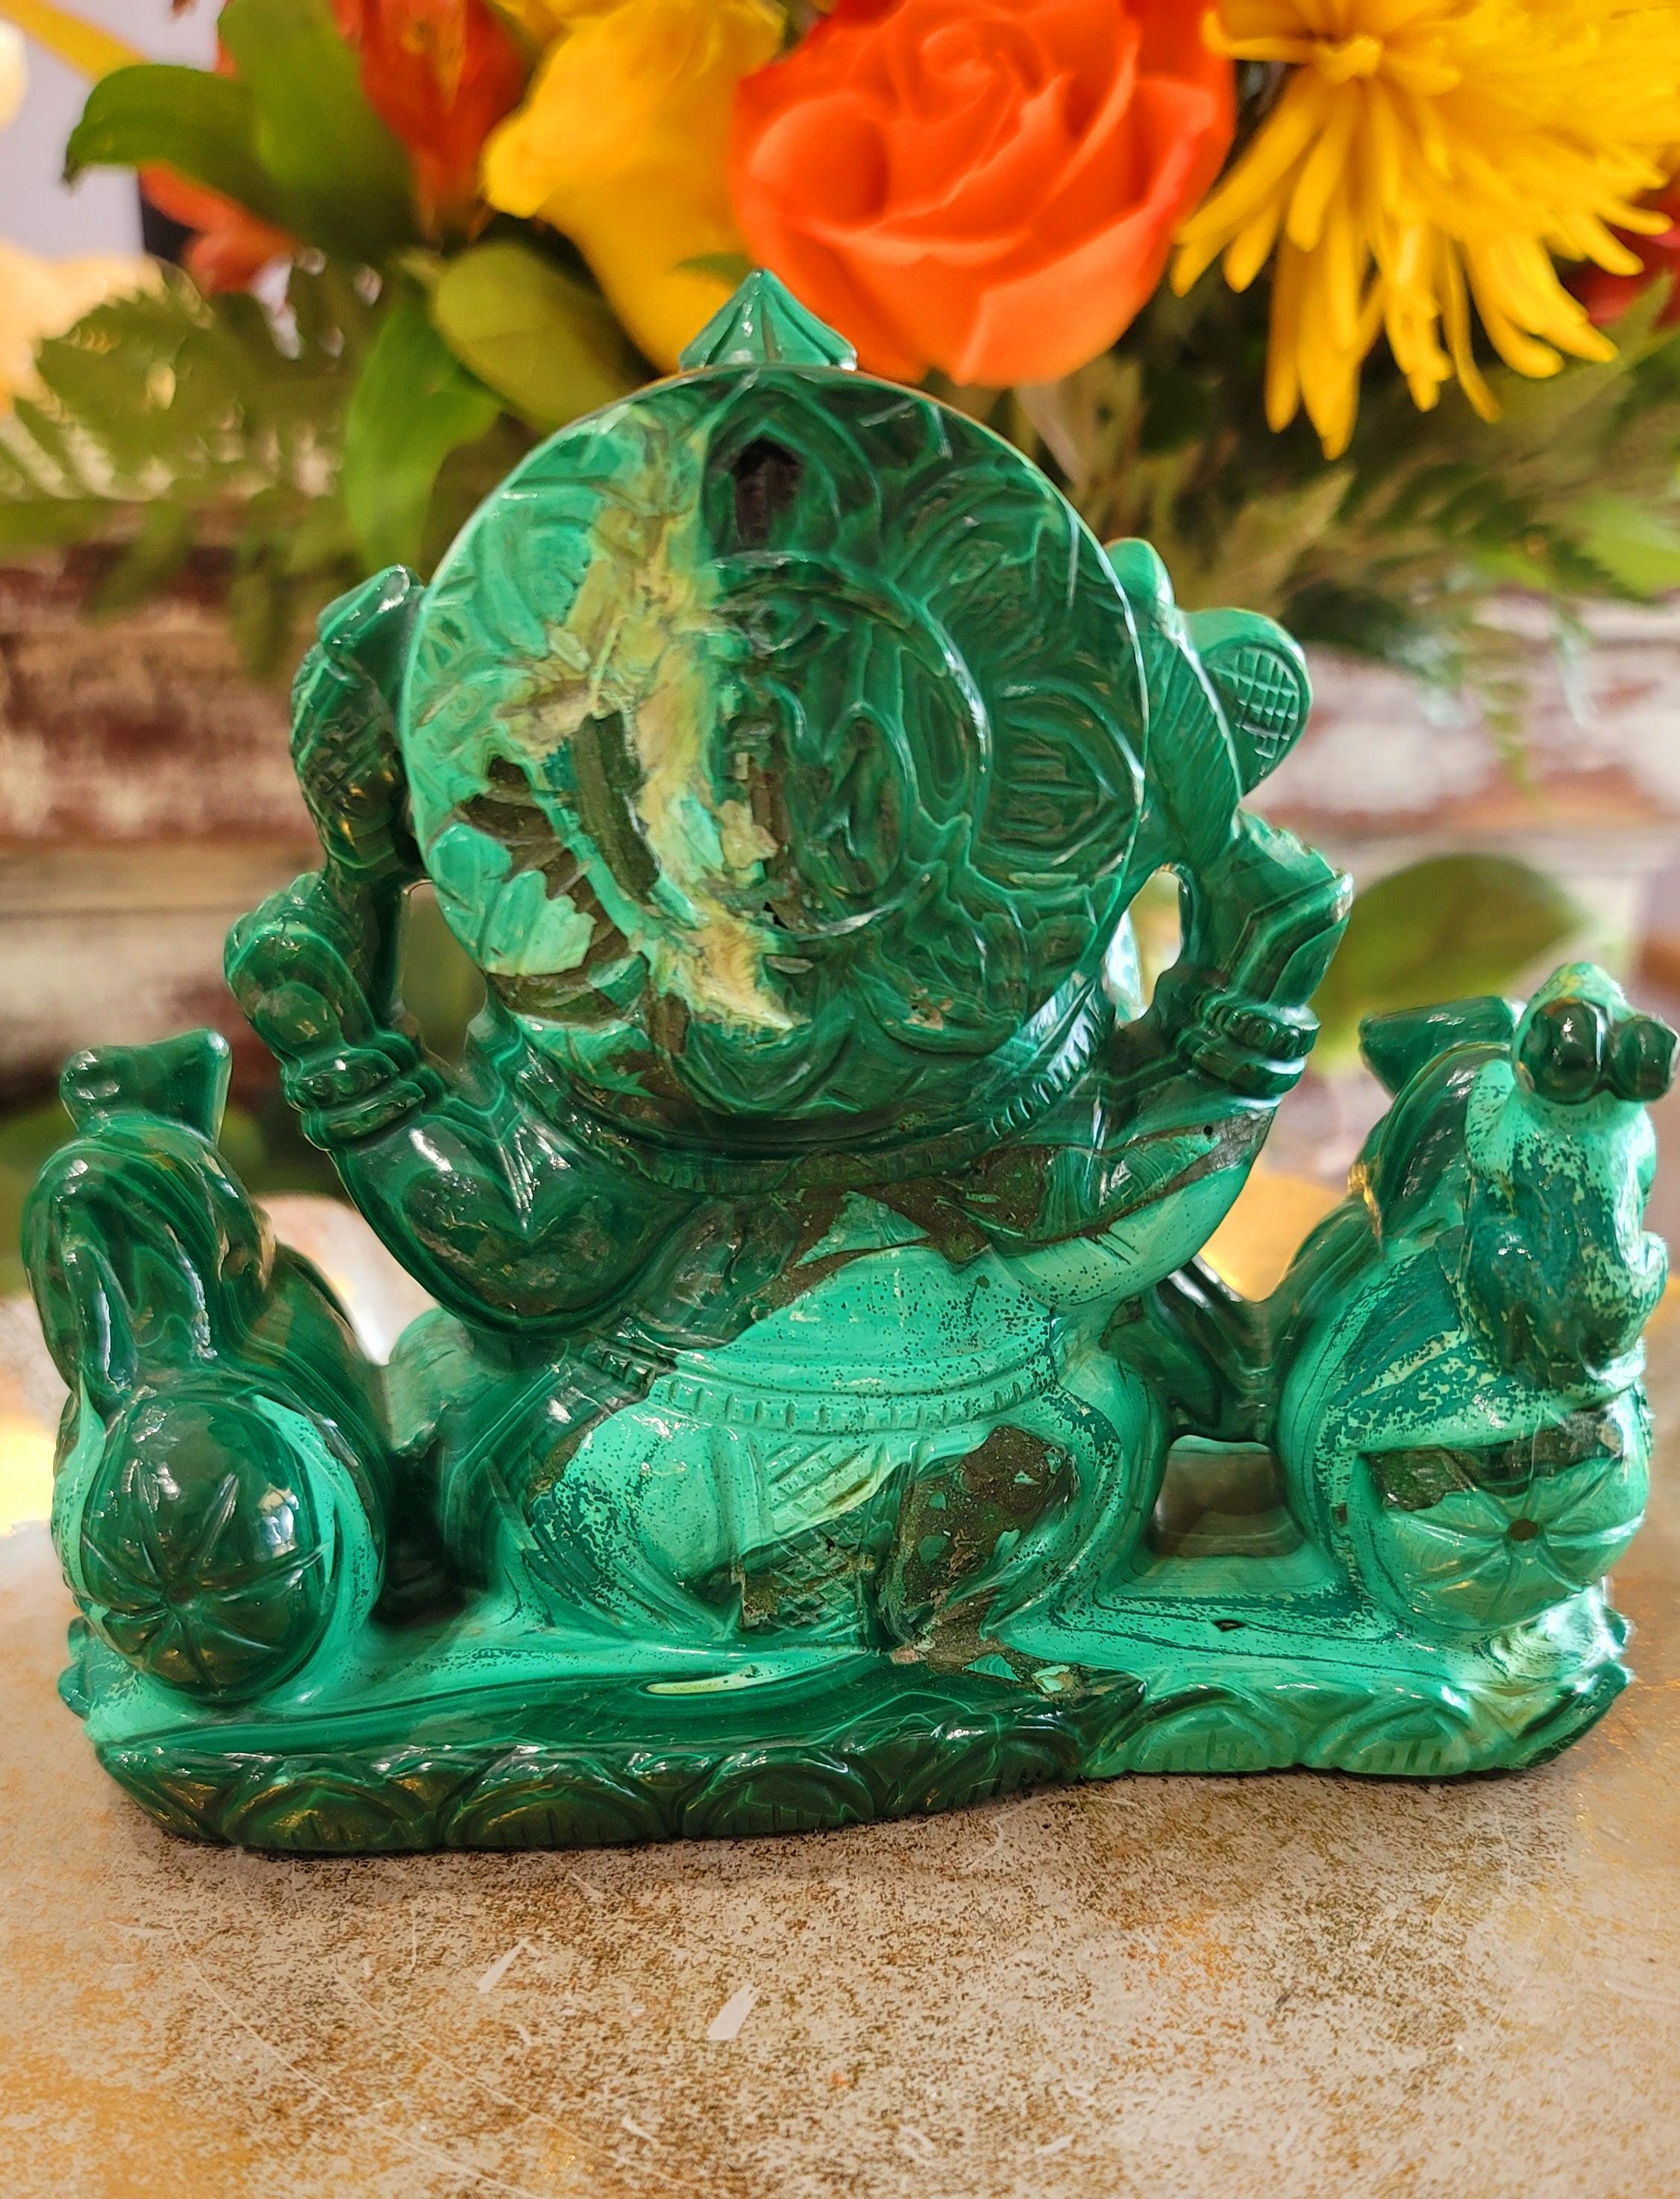 Malachite Ganesha Carving for Removing Blockages to Abundance and Health